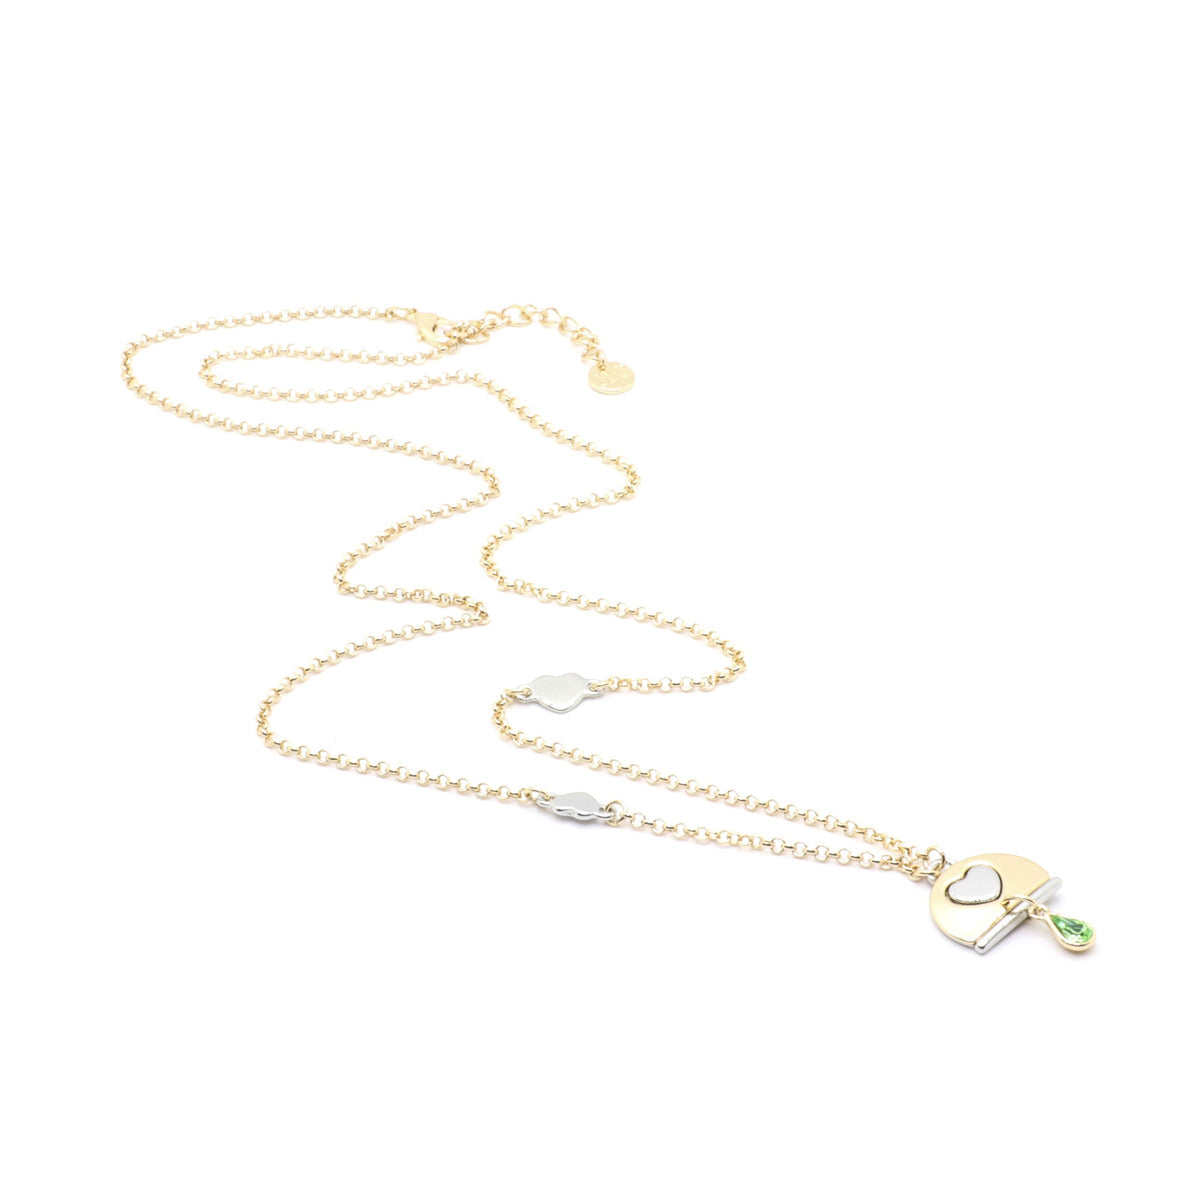 Long metal necklace with two -tone bell pendant